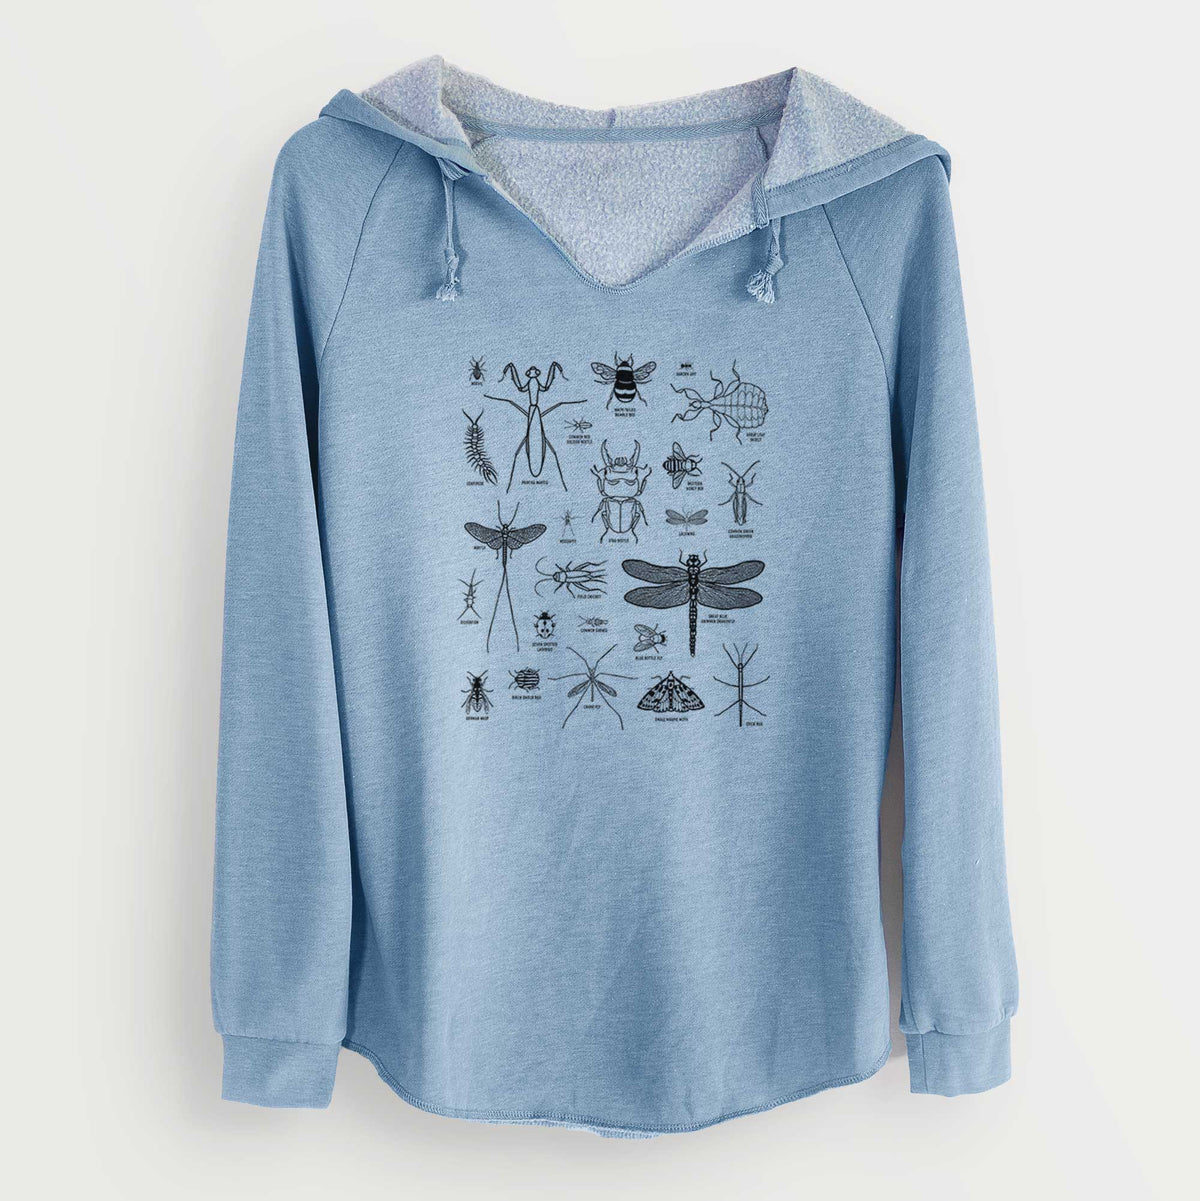 Chart of Arthropods/Insects - Cali Wave Hooded Sweatshirt